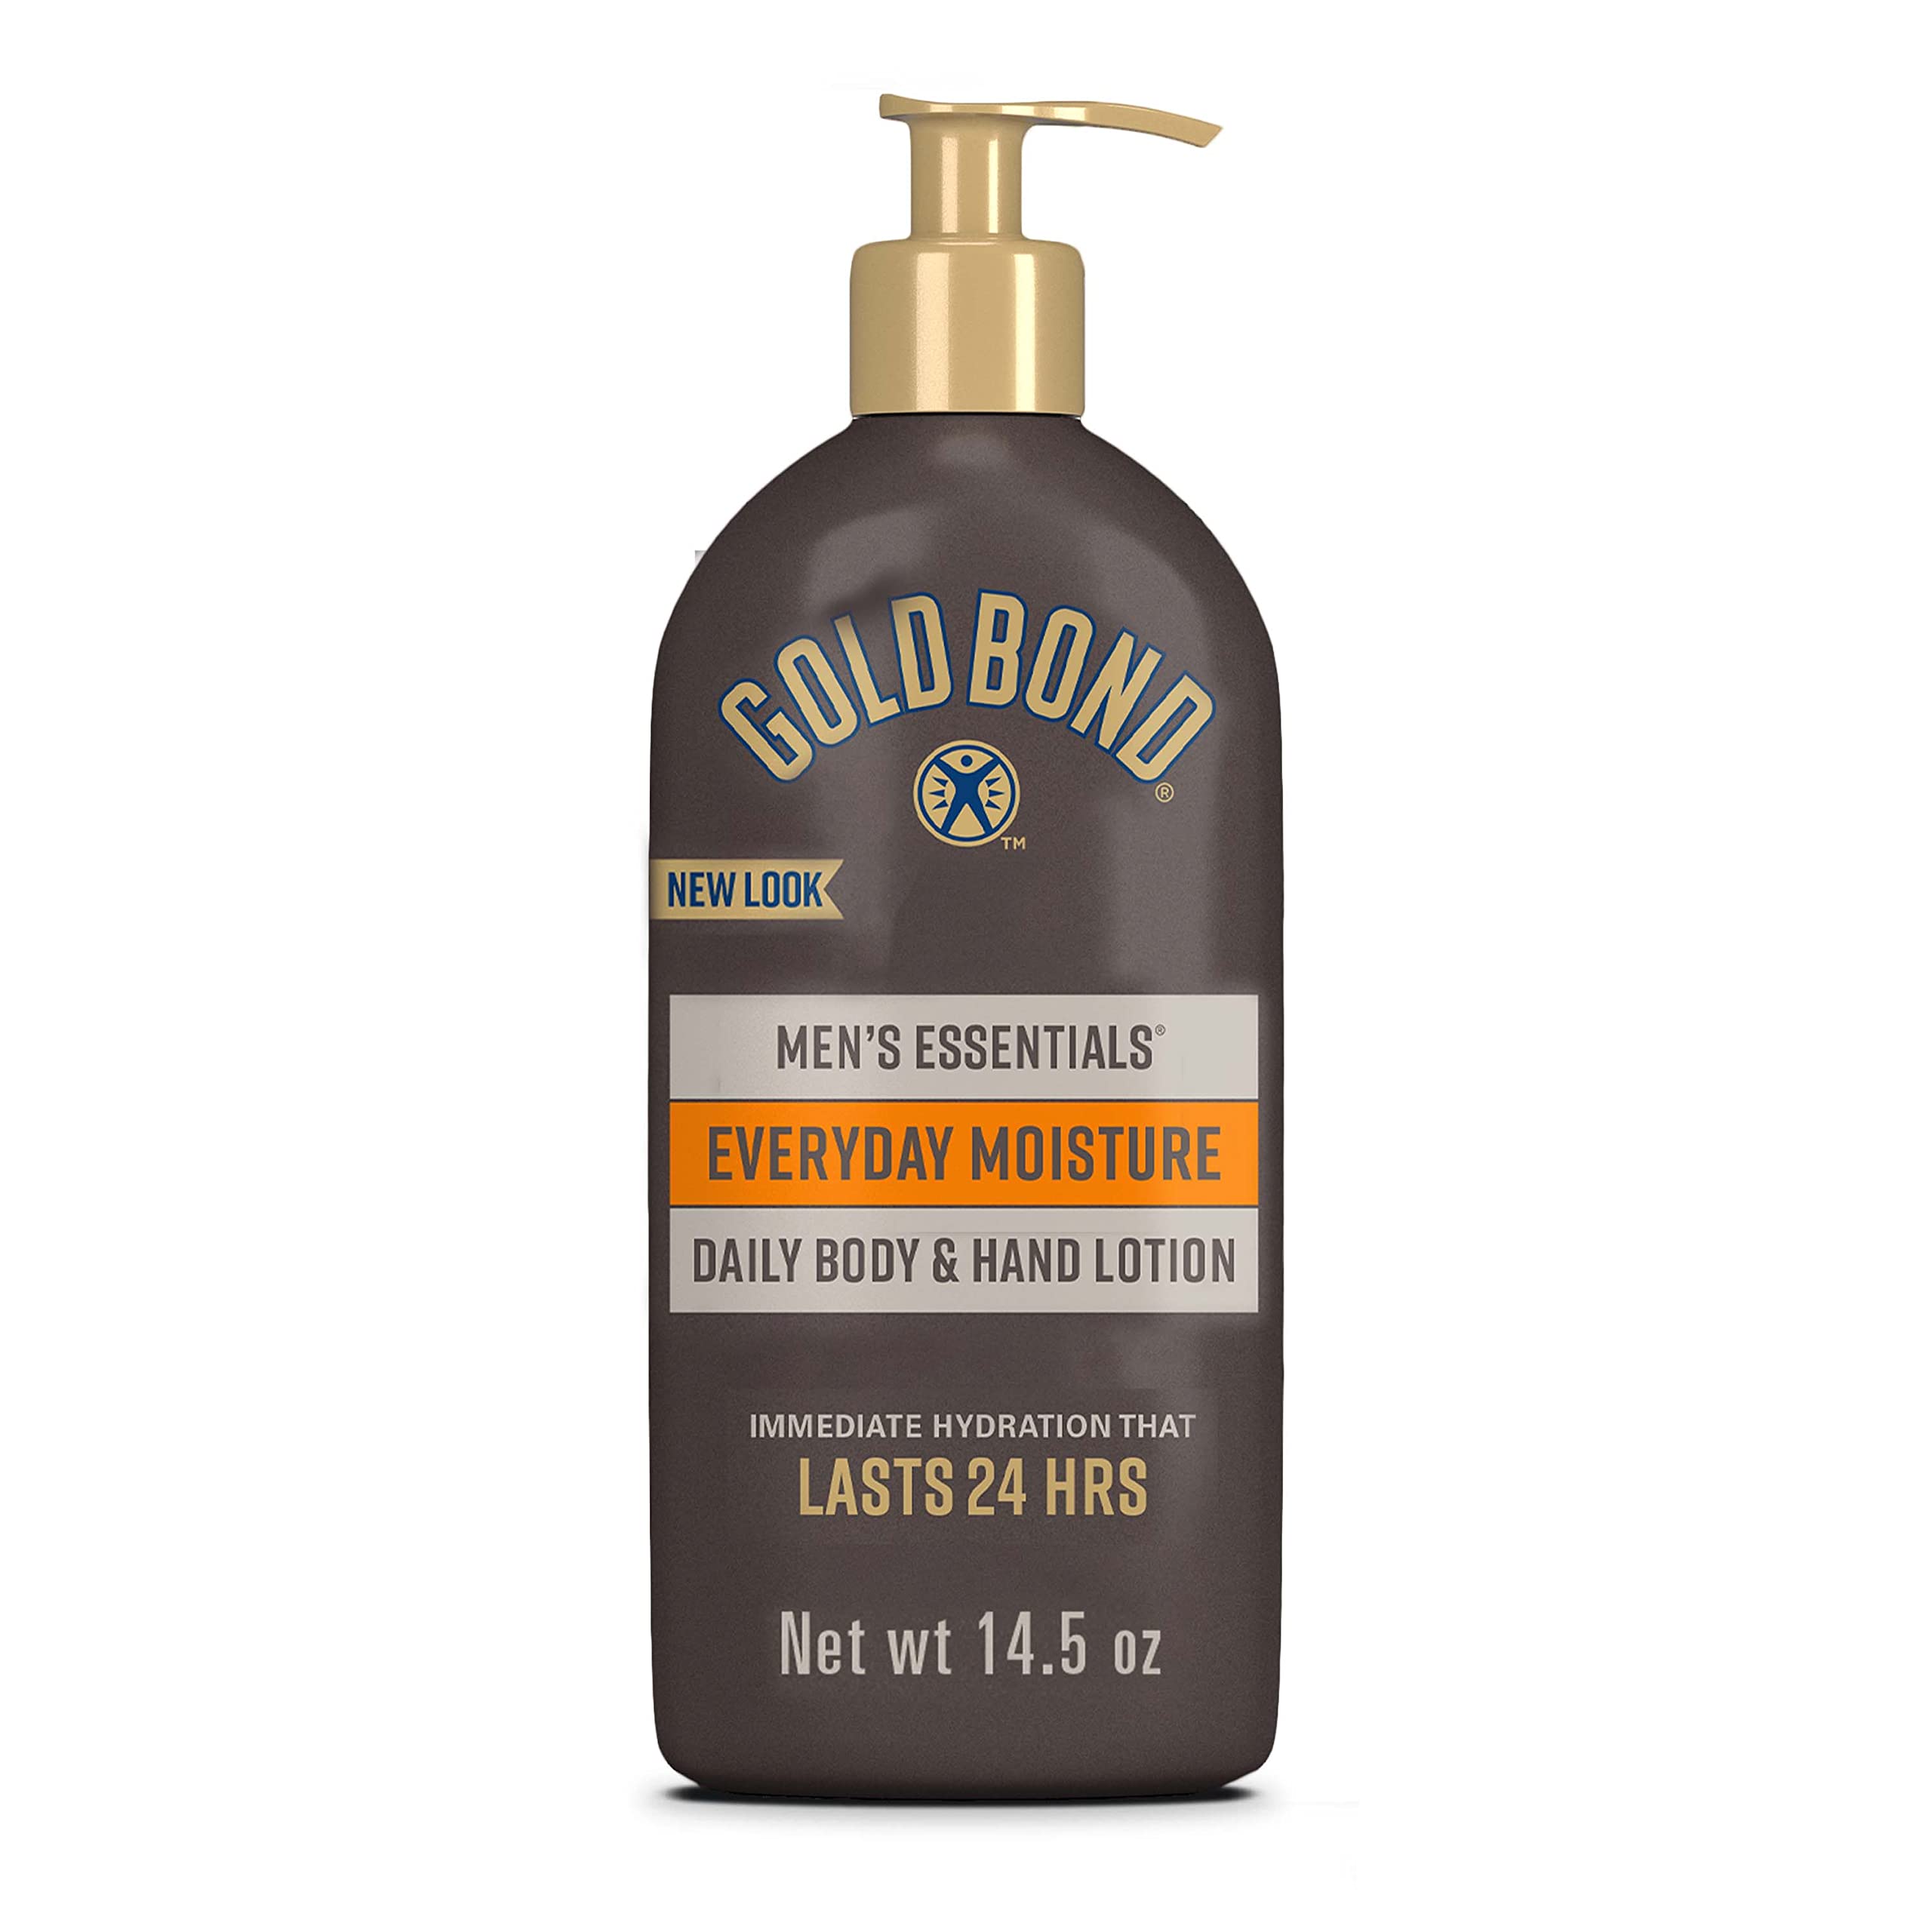 14.5-Oz Gold Bond Men's Essentials Everyday Moisture Daily Body & Hand Lotion $7.20 w/ S&S + Free Shipping w/ Prime or on $35+